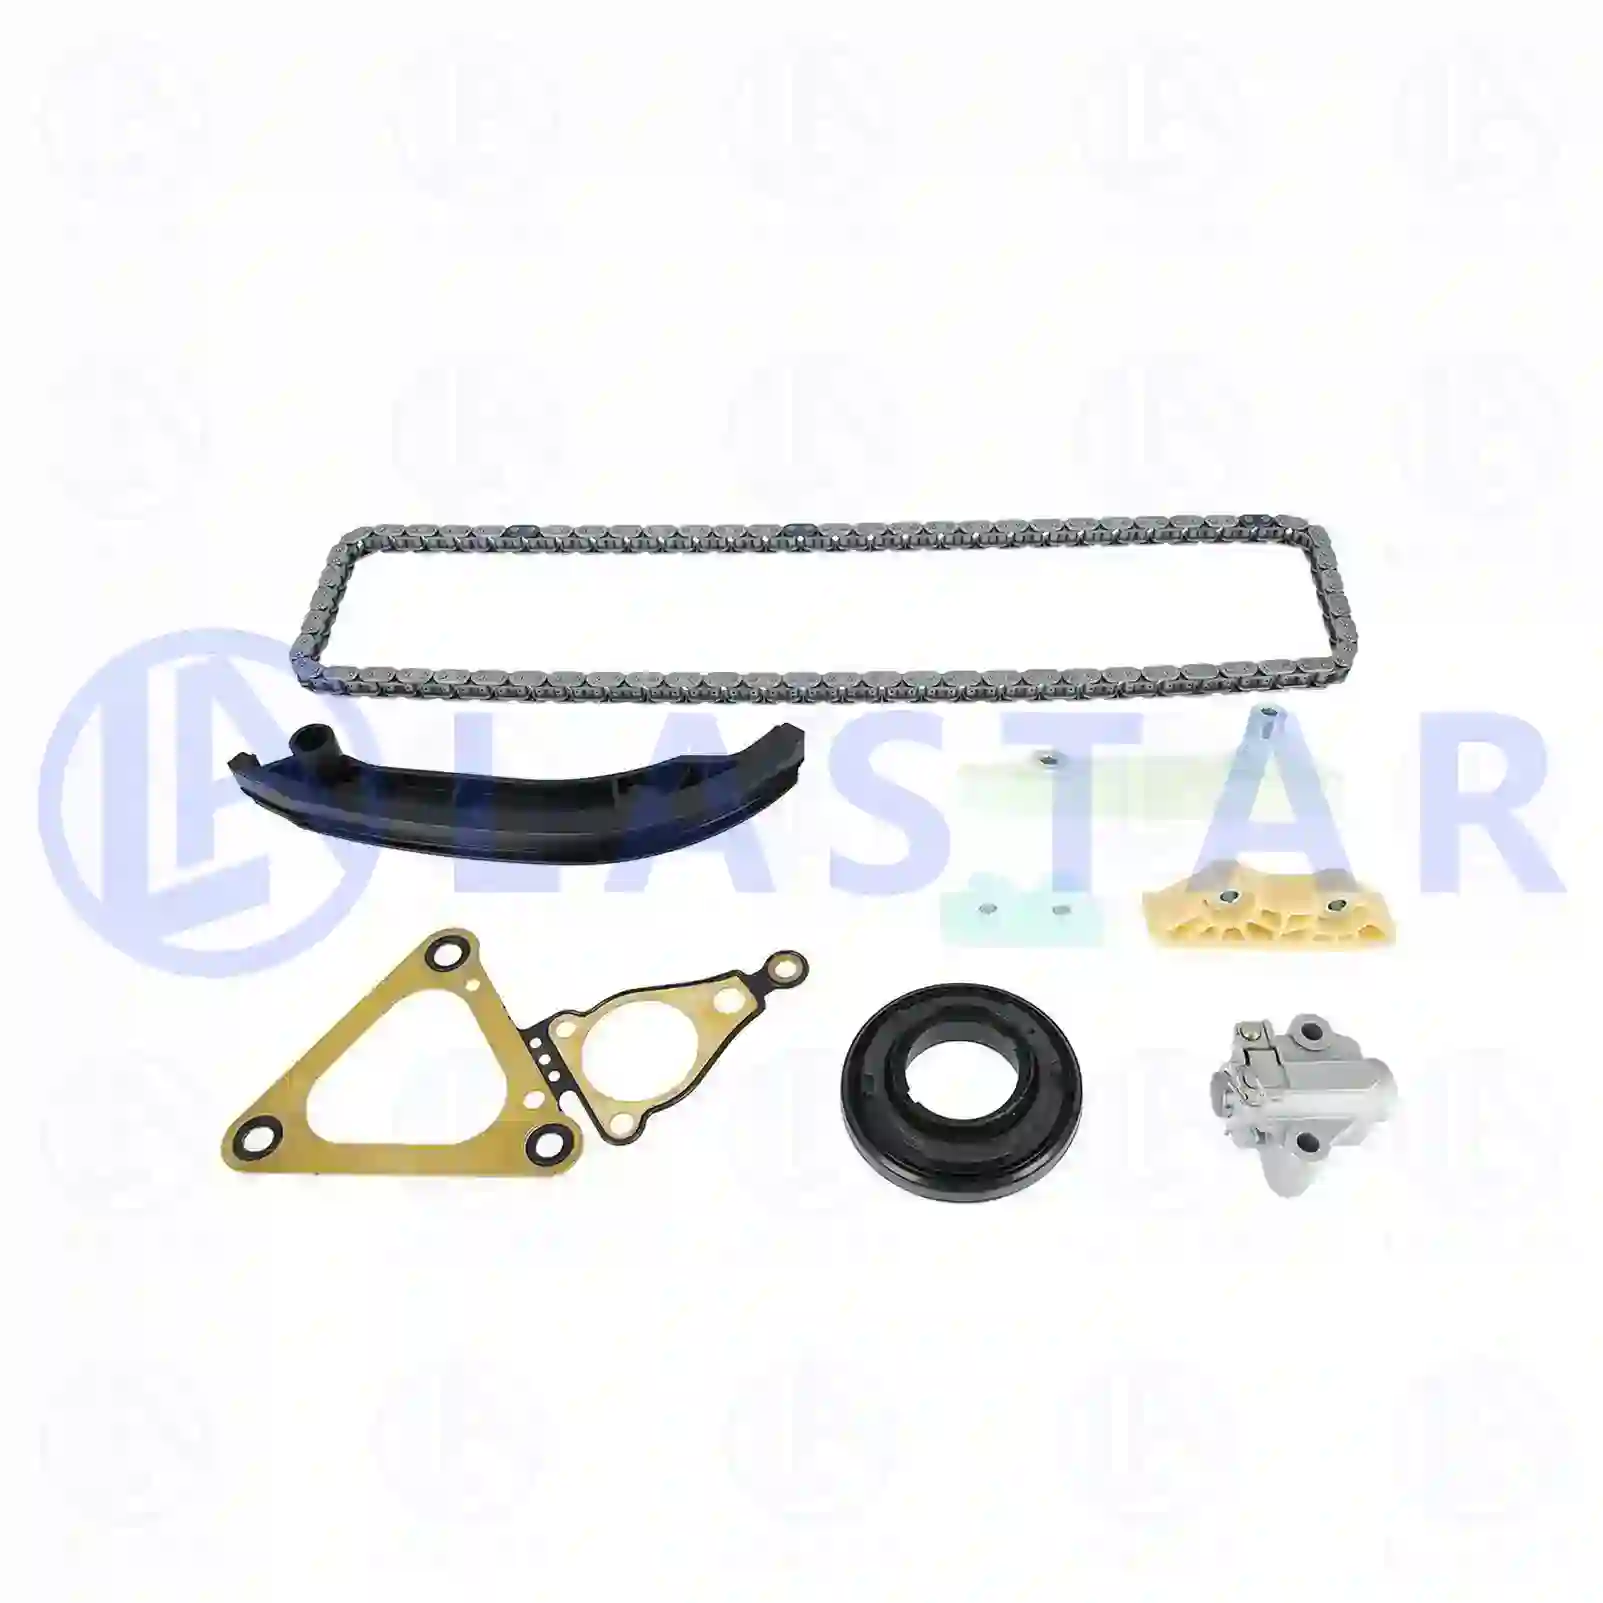 Timing chain kit, 77701090, 1704089S ||  77701090 Lastar Spare Part | Truck Spare Parts, Auotomotive Spare Parts Timing chain kit, 77701090, 1704089S ||  77701090 Lastar Spare Part | Truck Spare Parts, Auotomotive Spare Parts